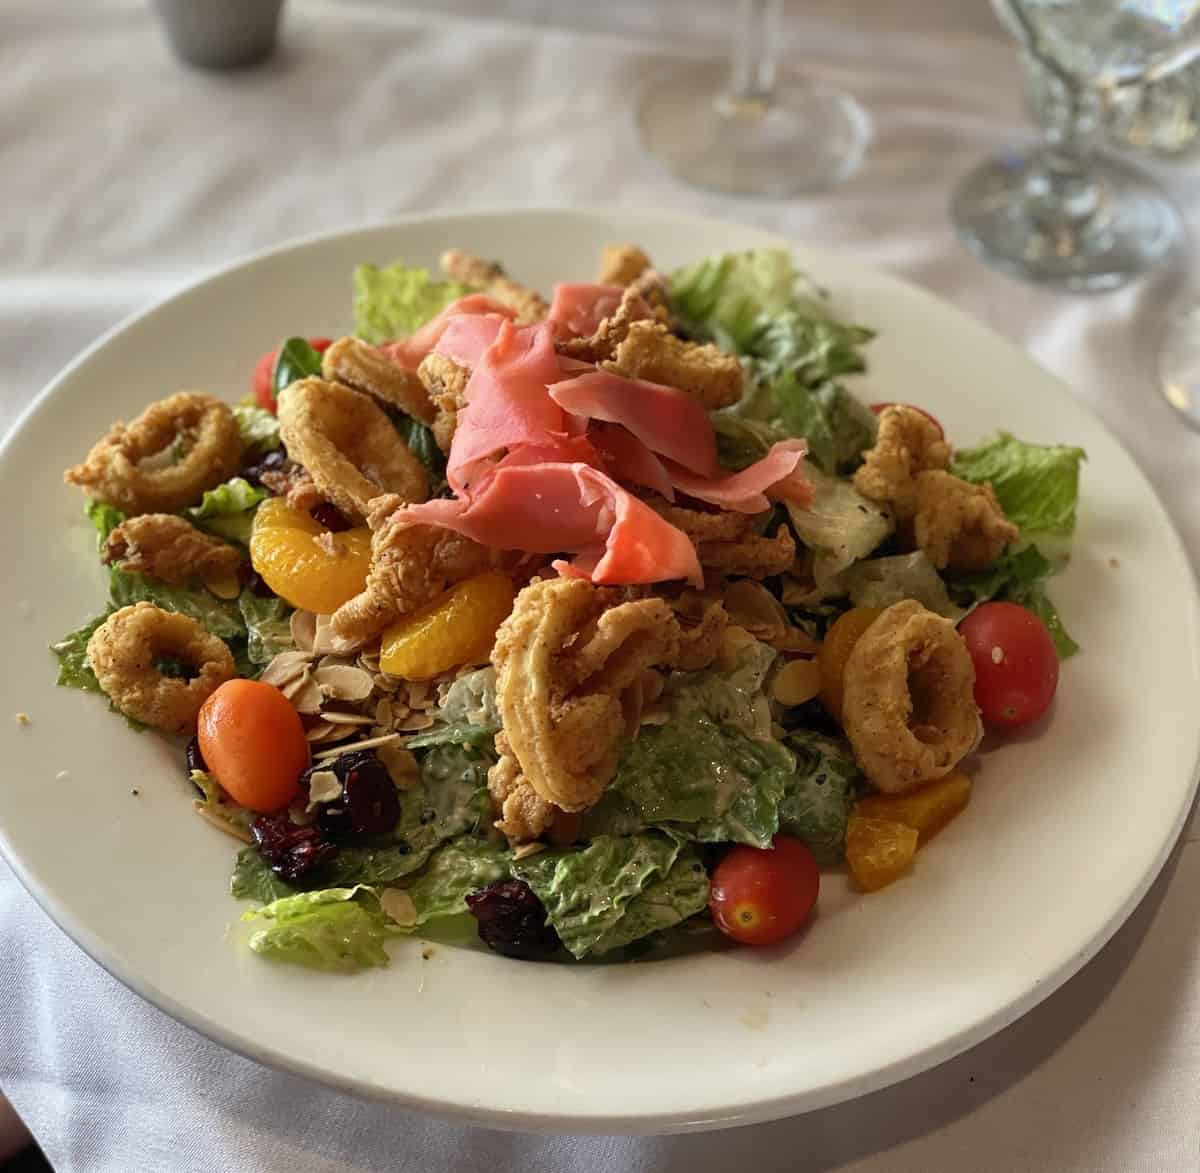 Calamari on a salad with fresh ginger in a white bowl.